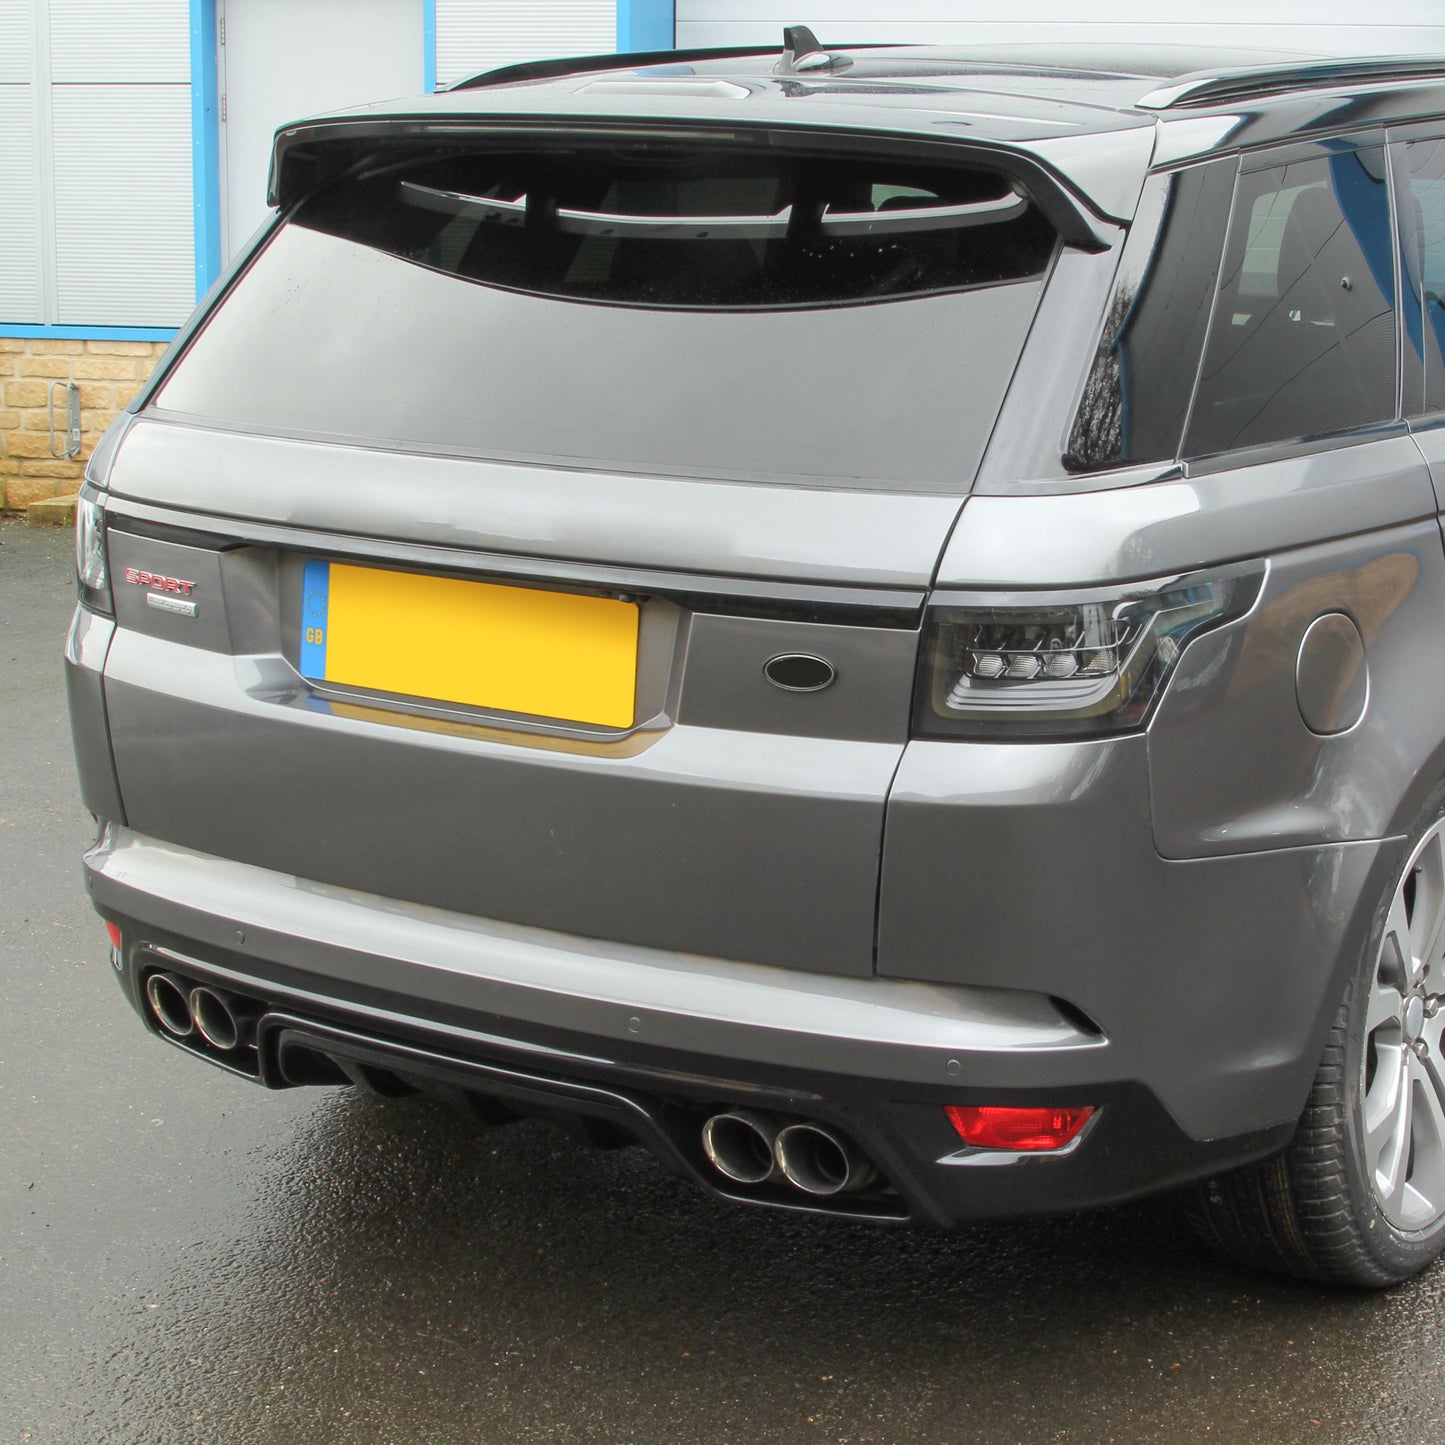 '2015 SVR' Style Exhaust Conversion Finishers for Range Rover Sport L494 2014-17 - Stainless